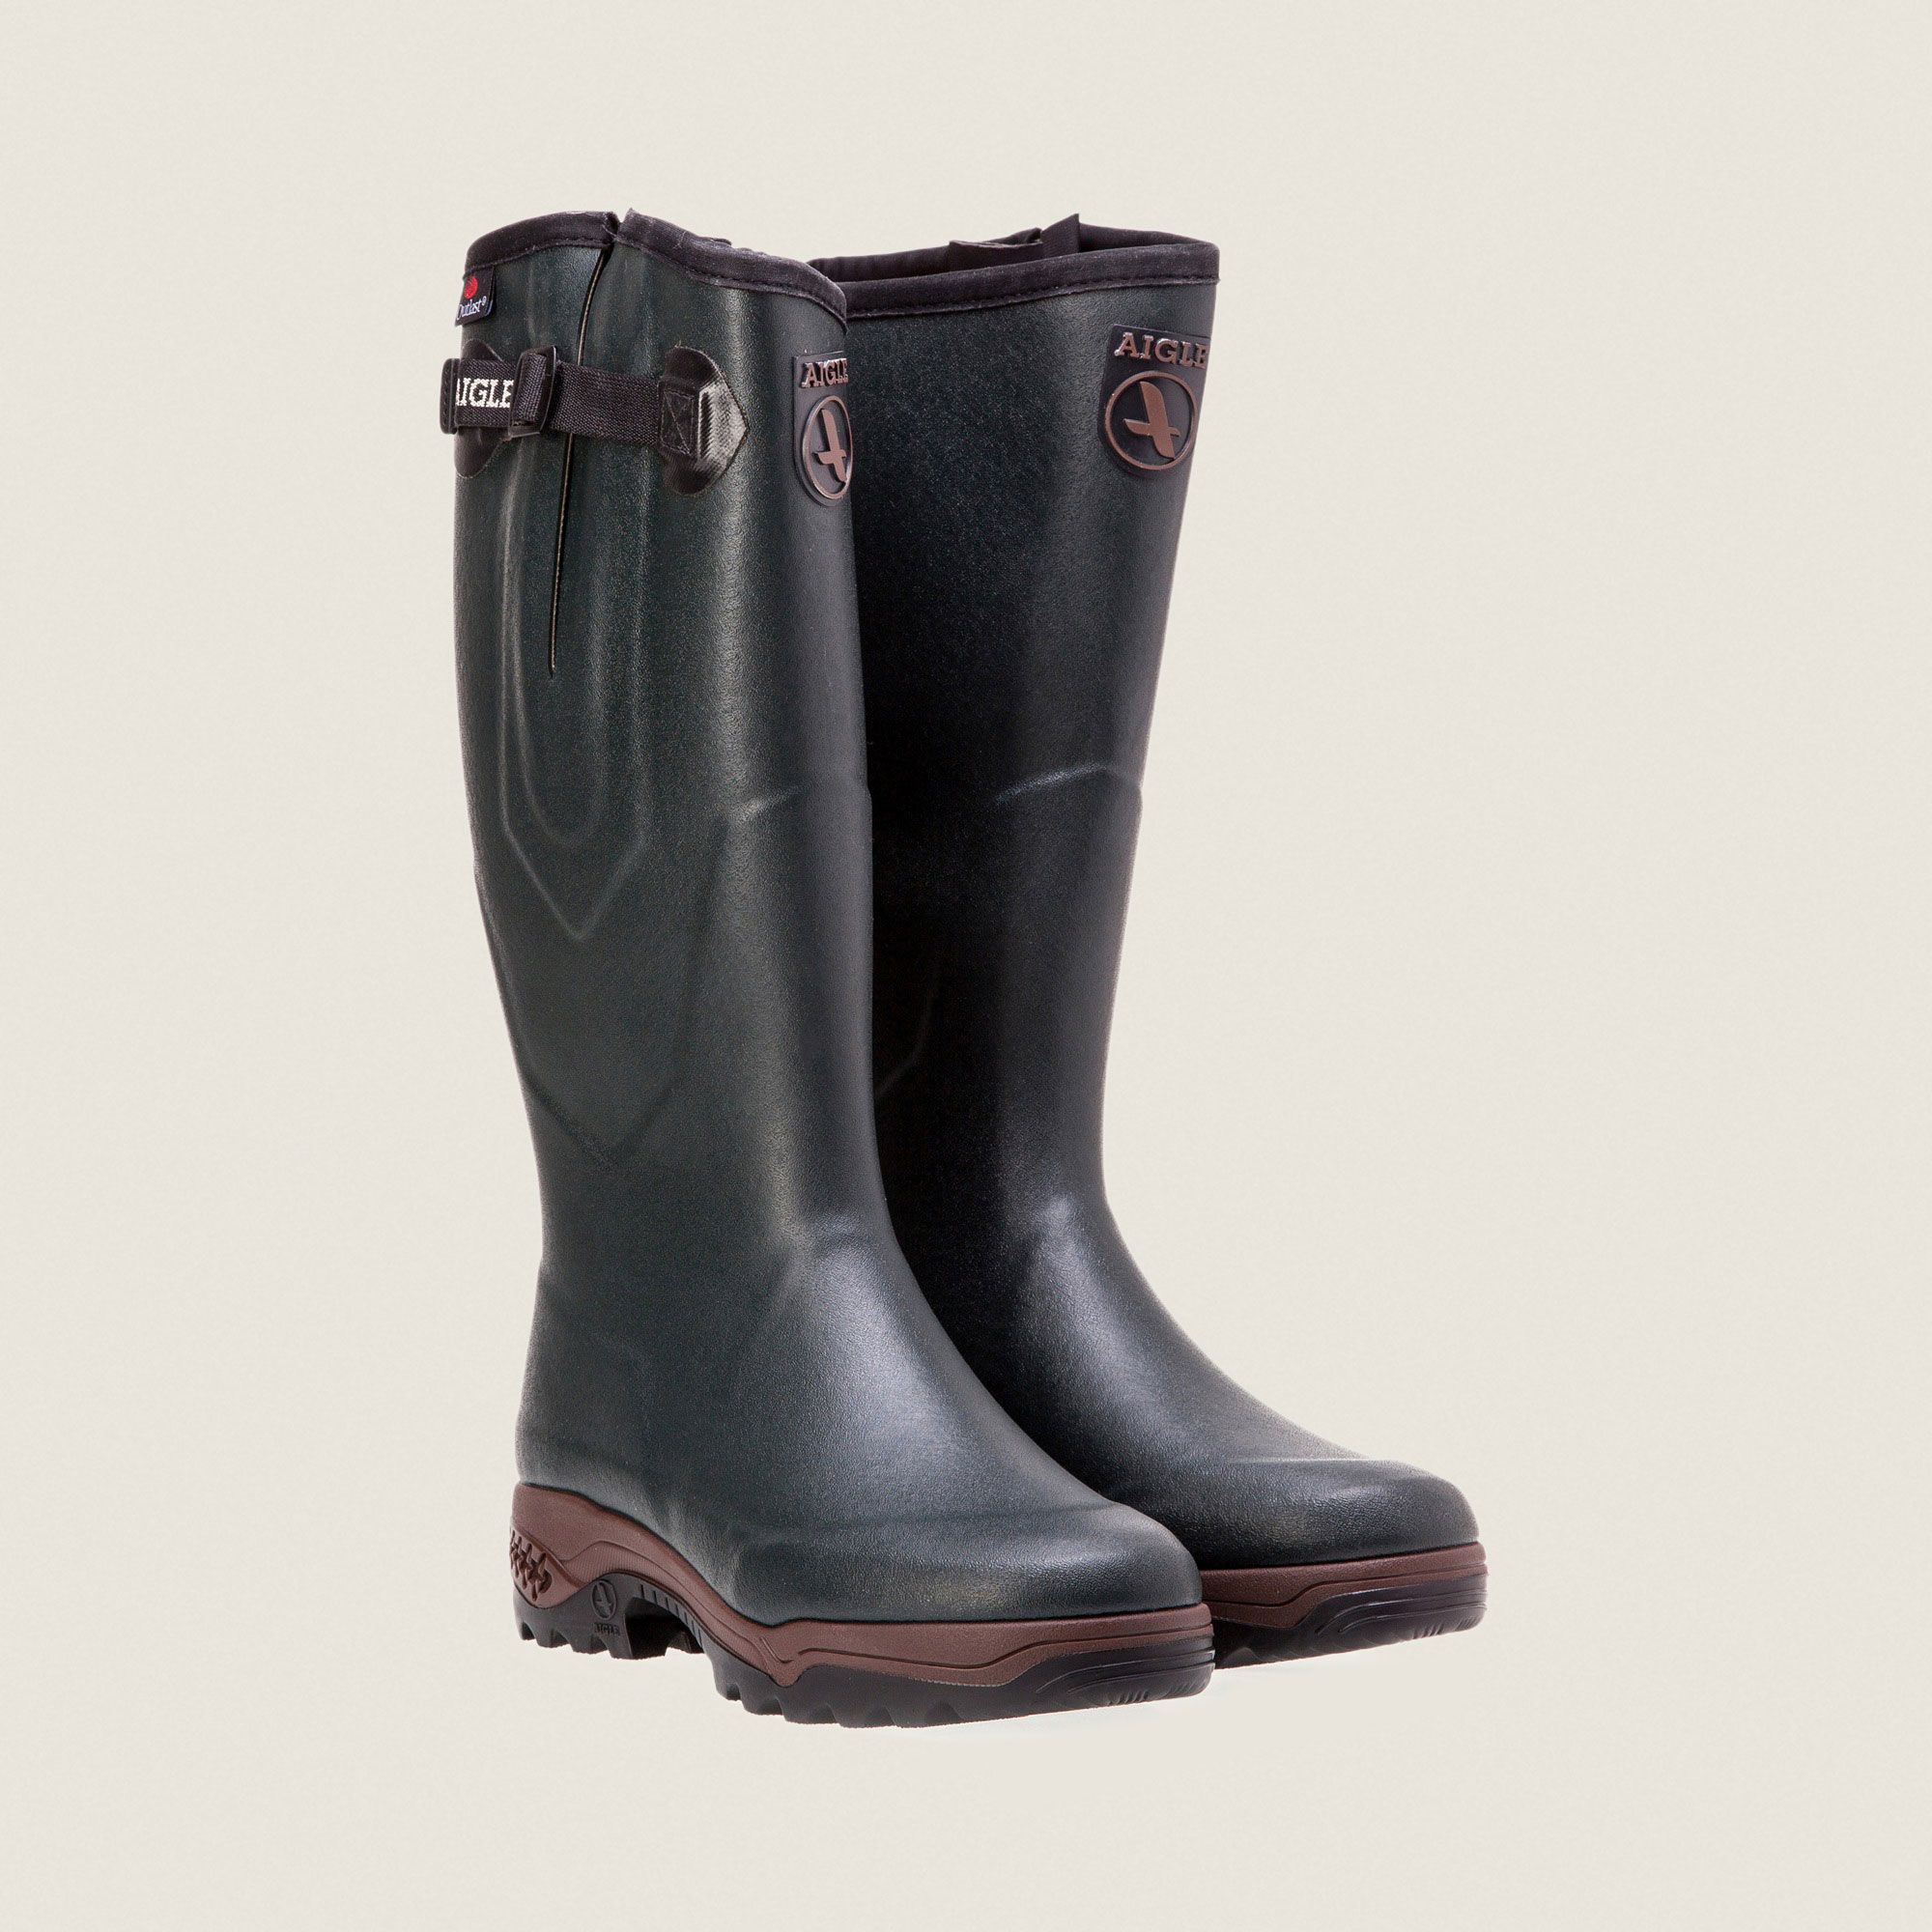 Tried and tested Welly Boots